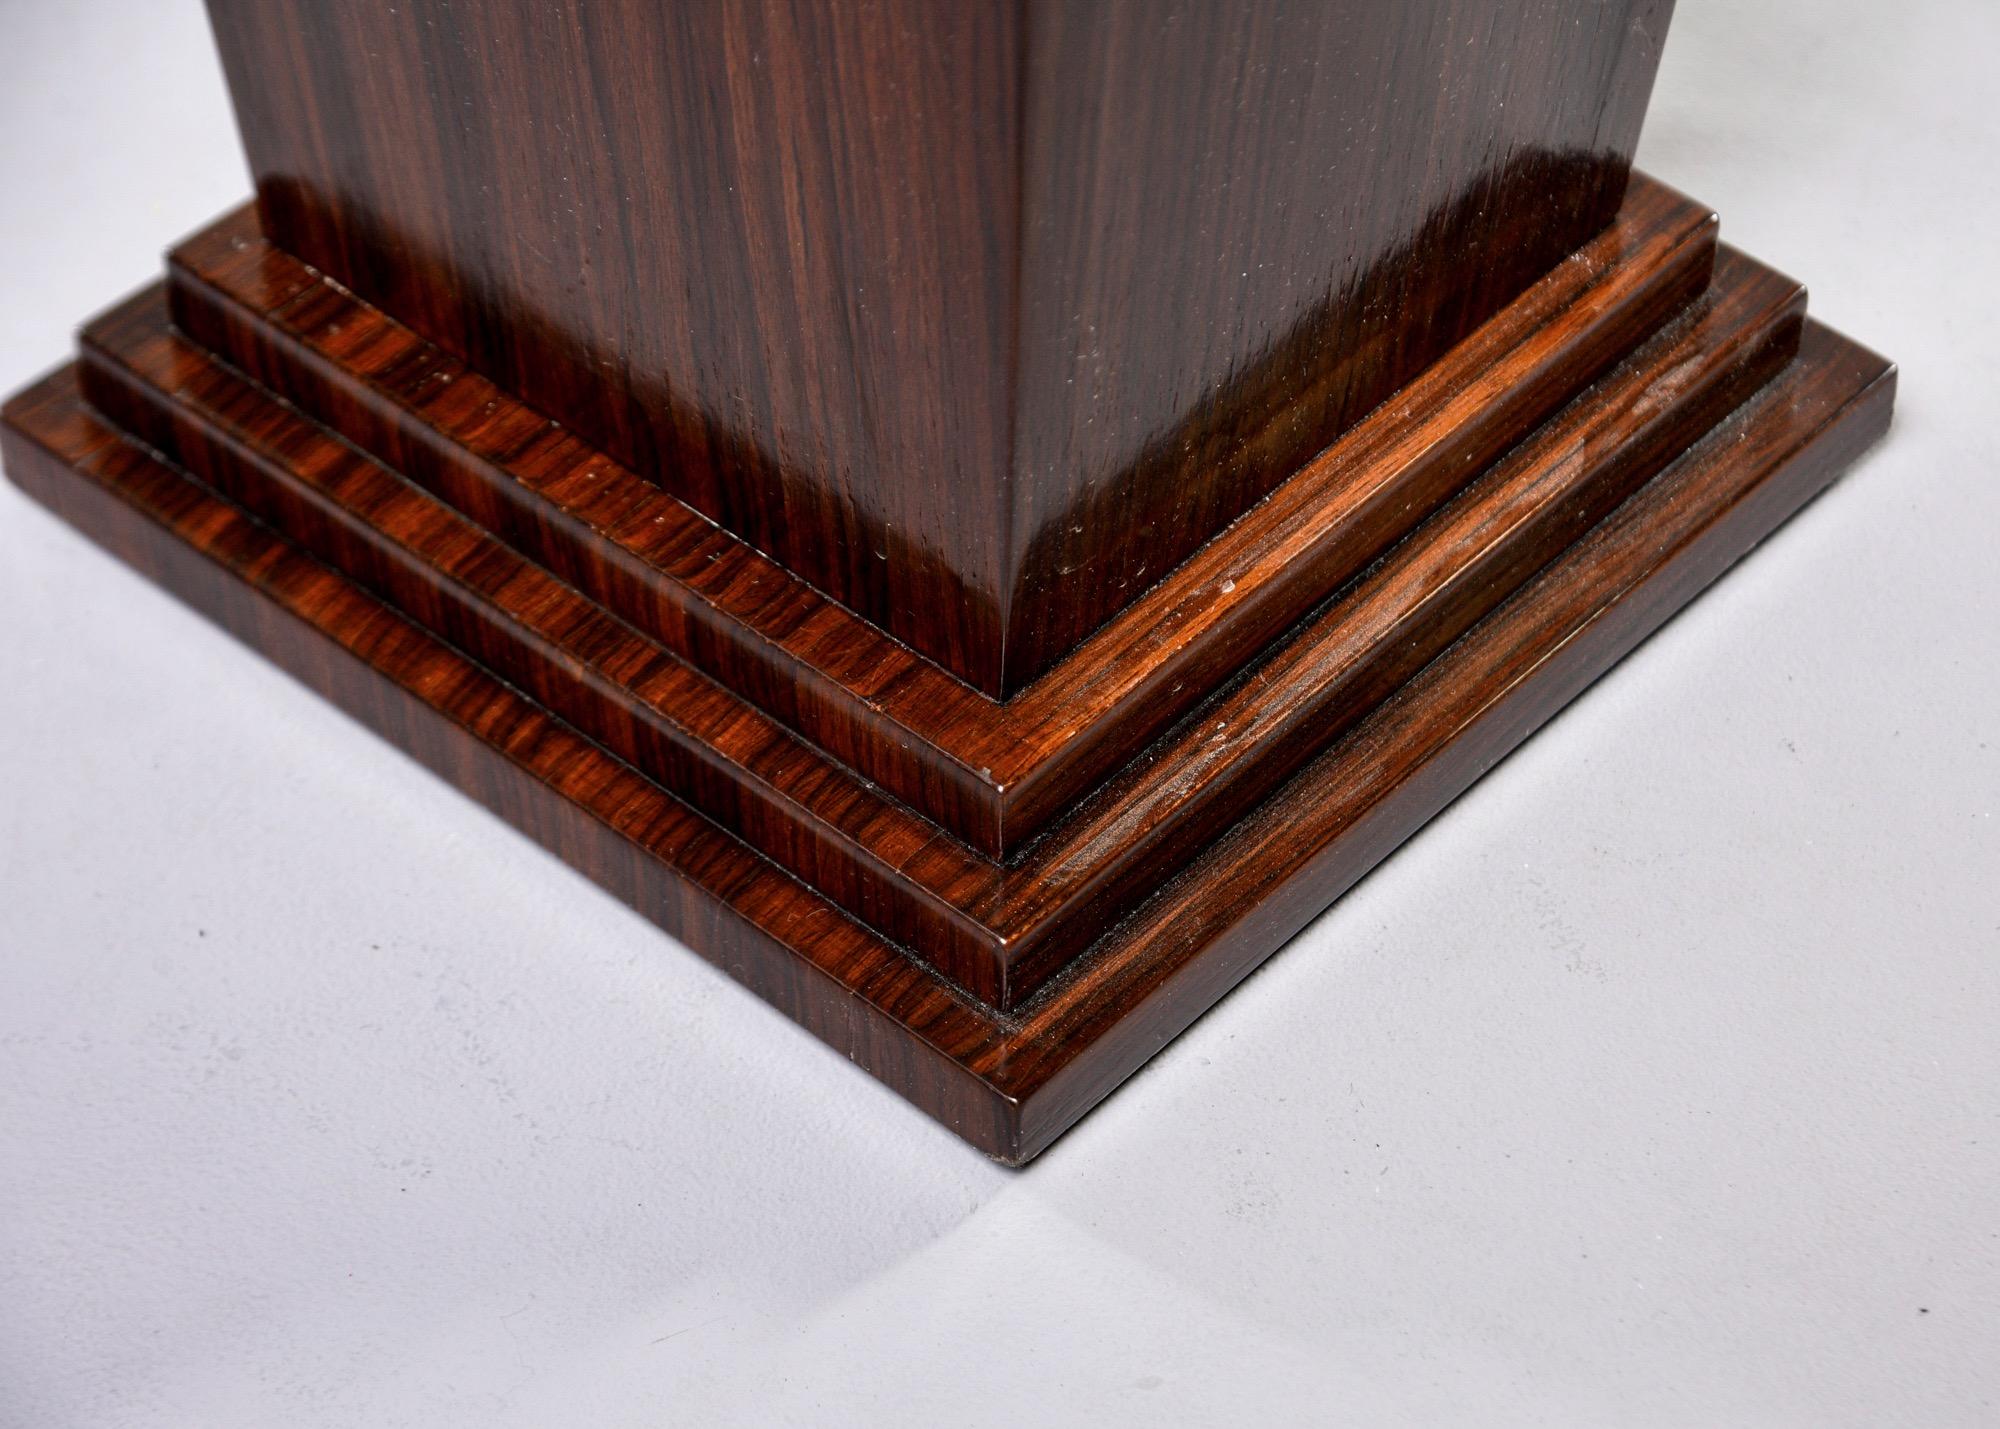 Pair of Tall Bespoke Walnut Display Stands with Interior under Light 1